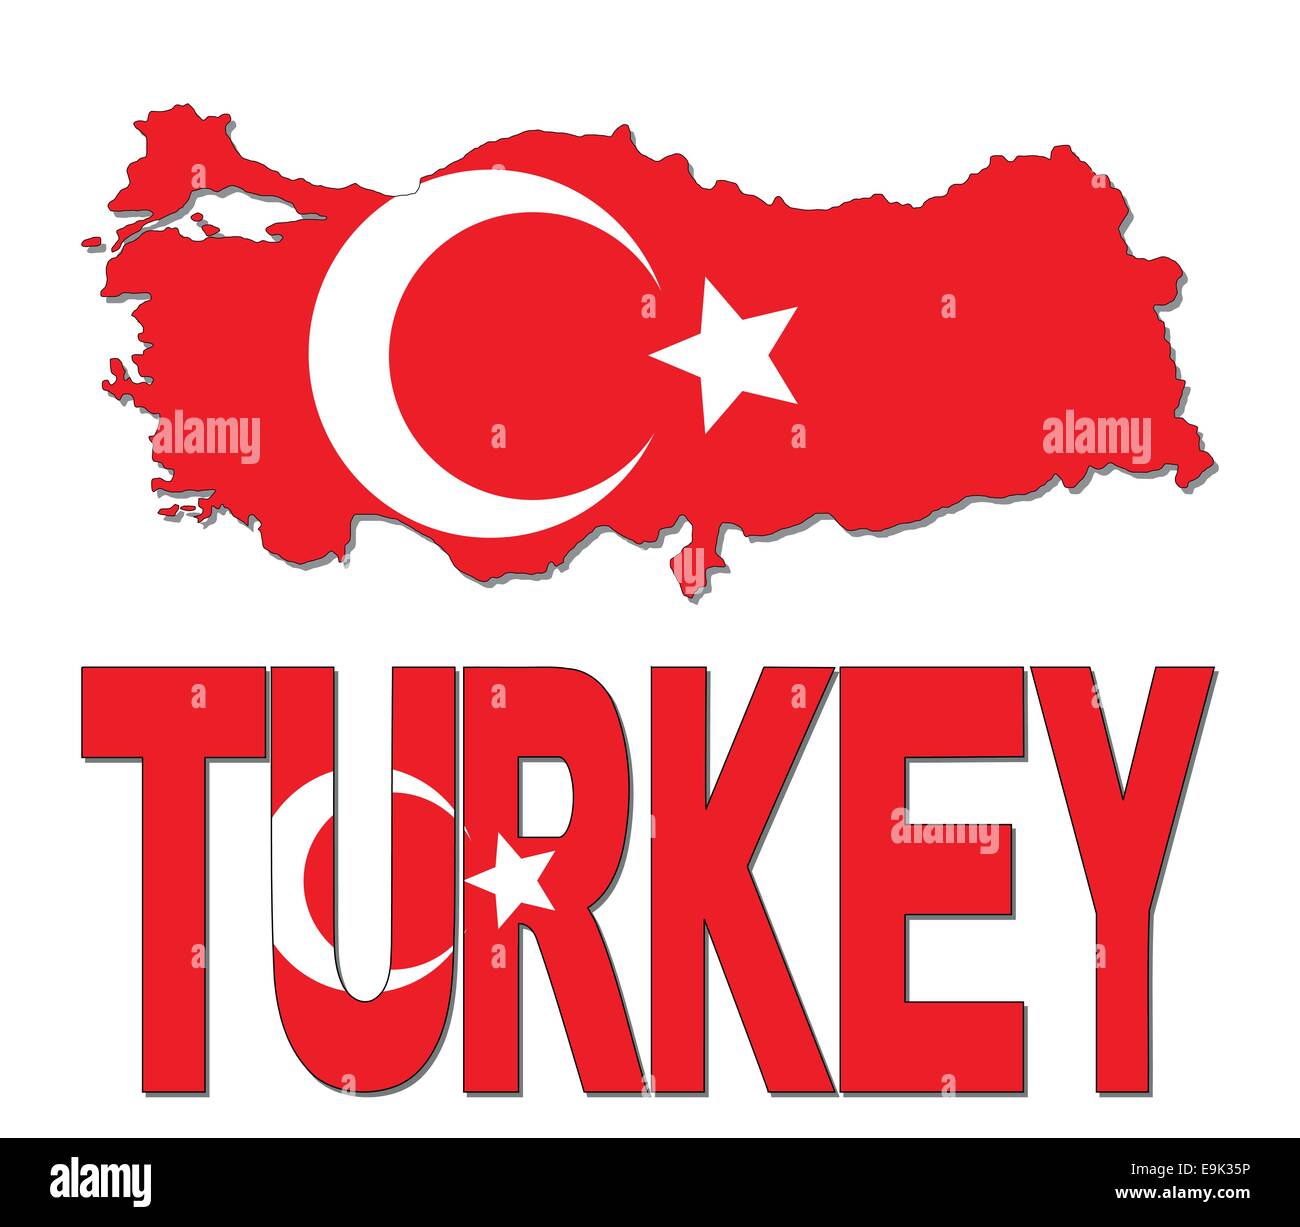 Turkey map flag and text illustration Stock Vector